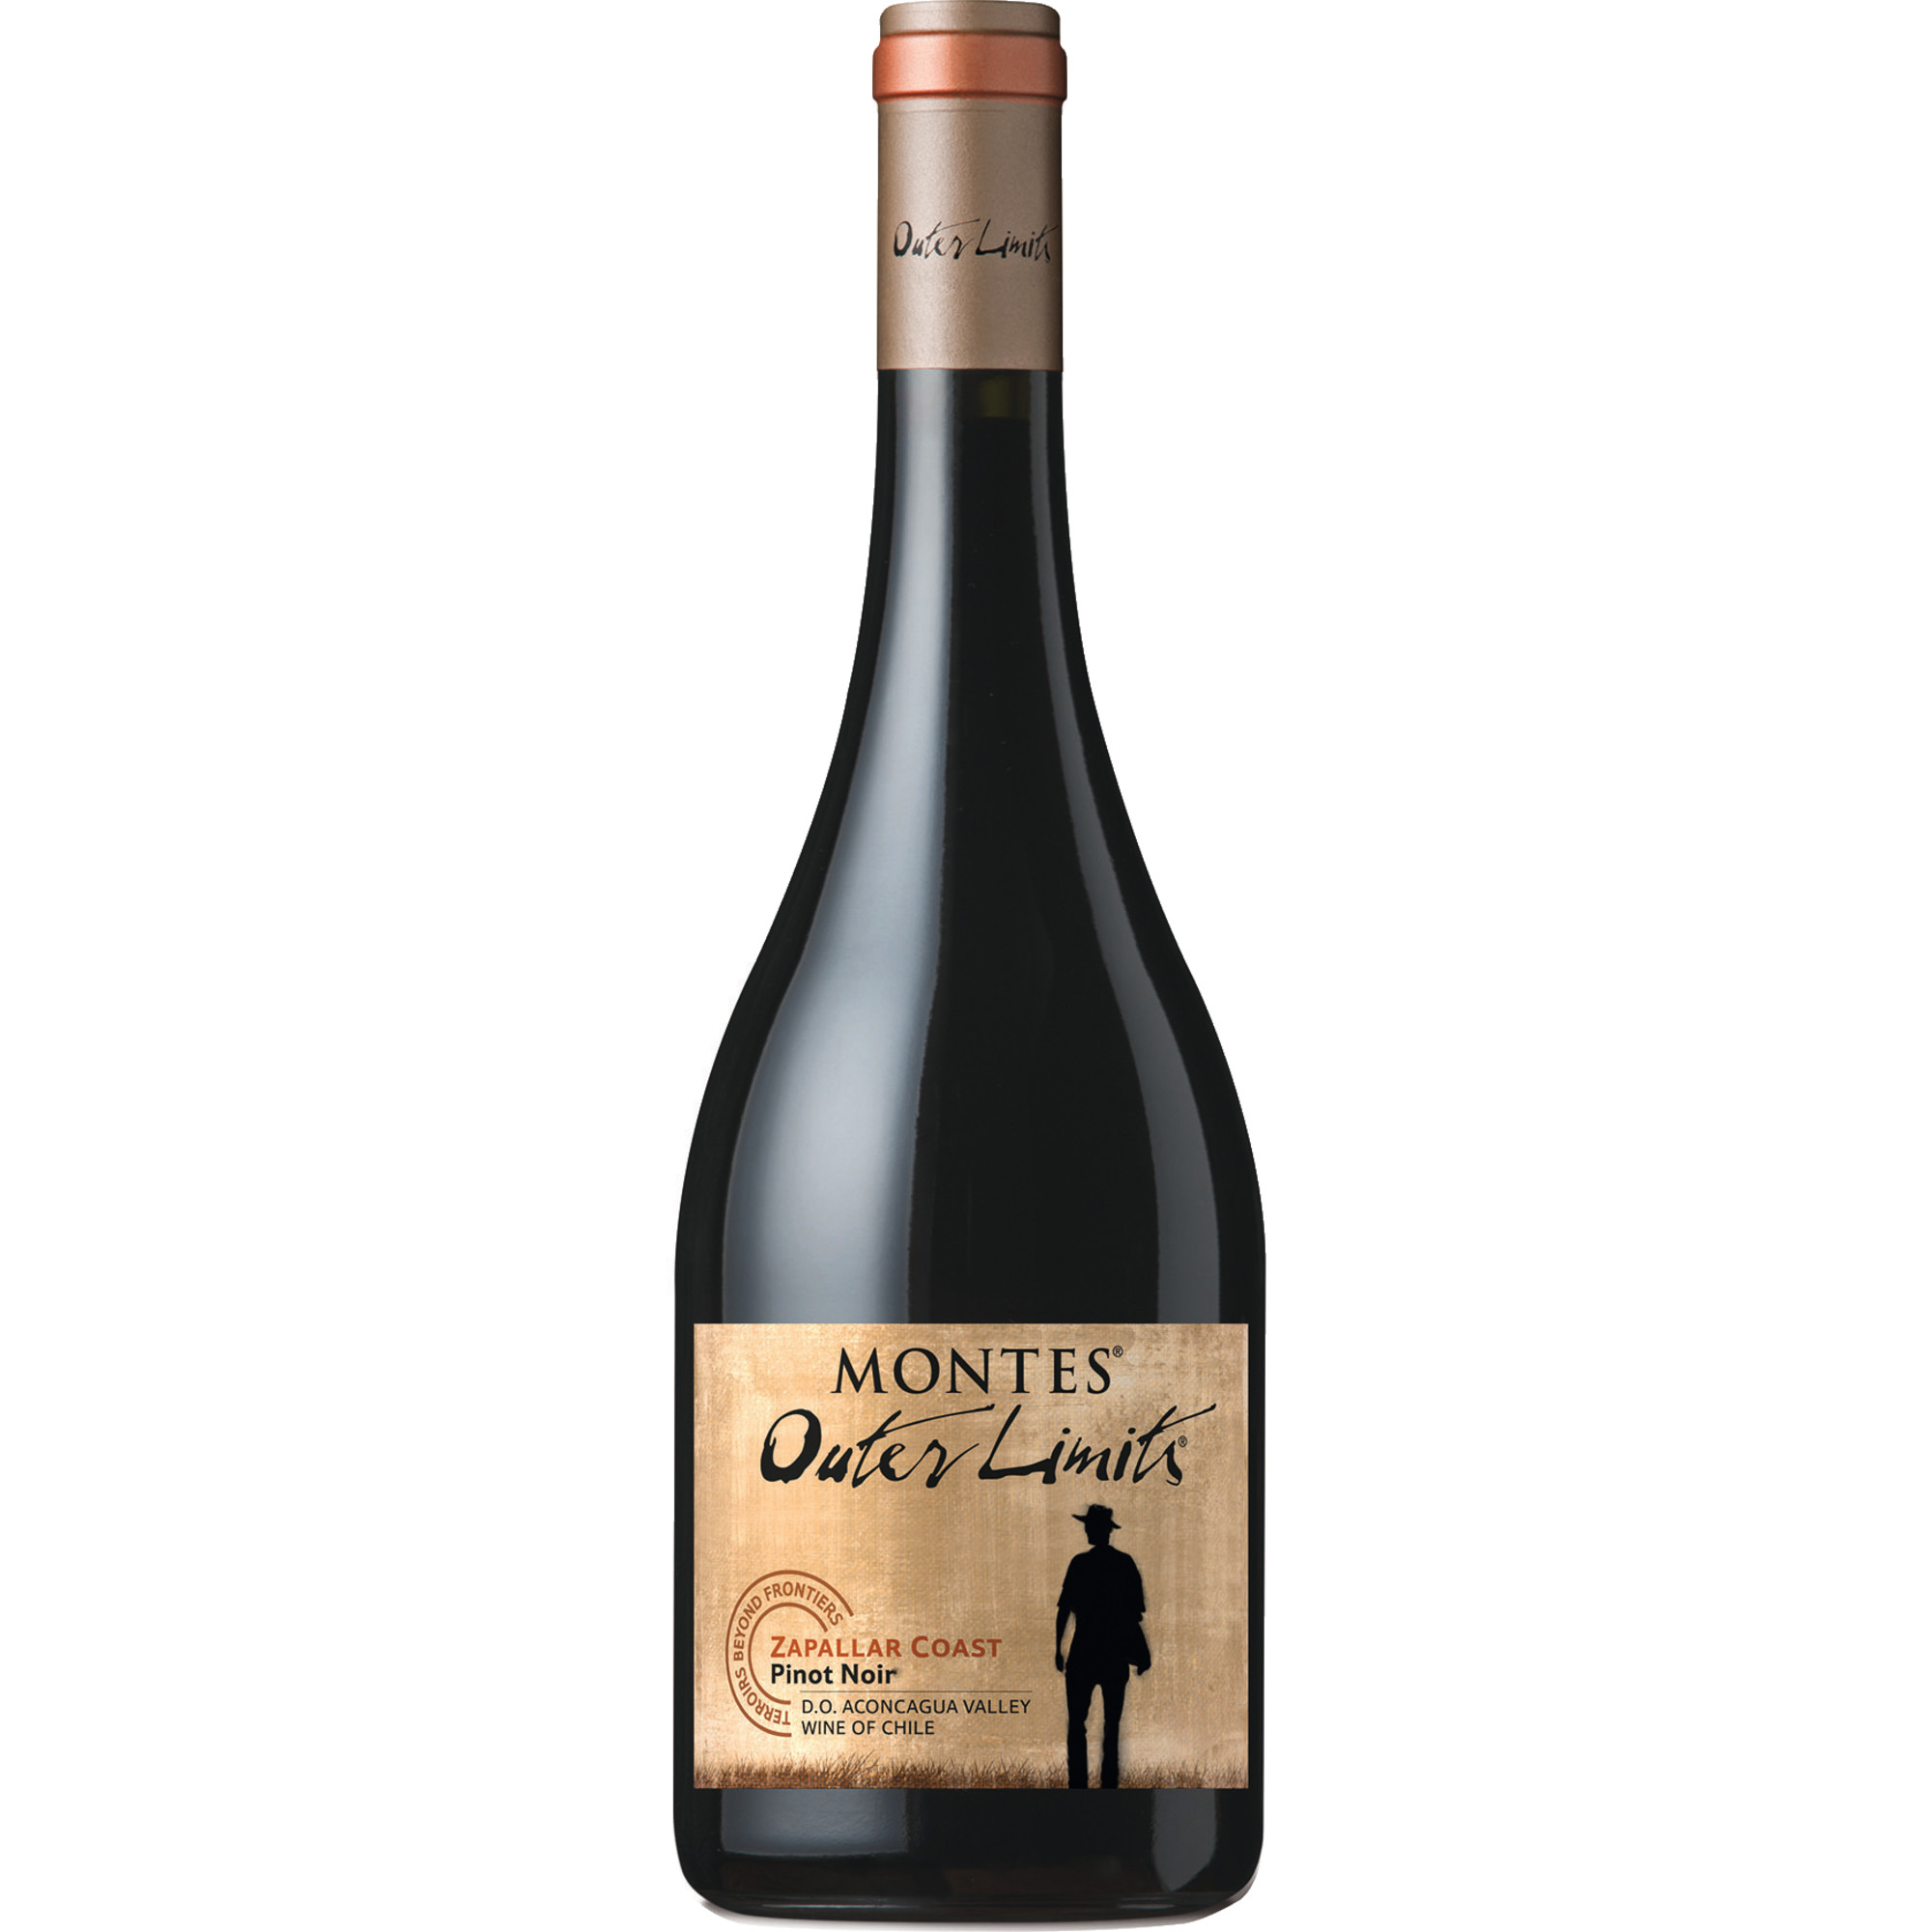 2020 Montes Outer Limits Pinot Noir